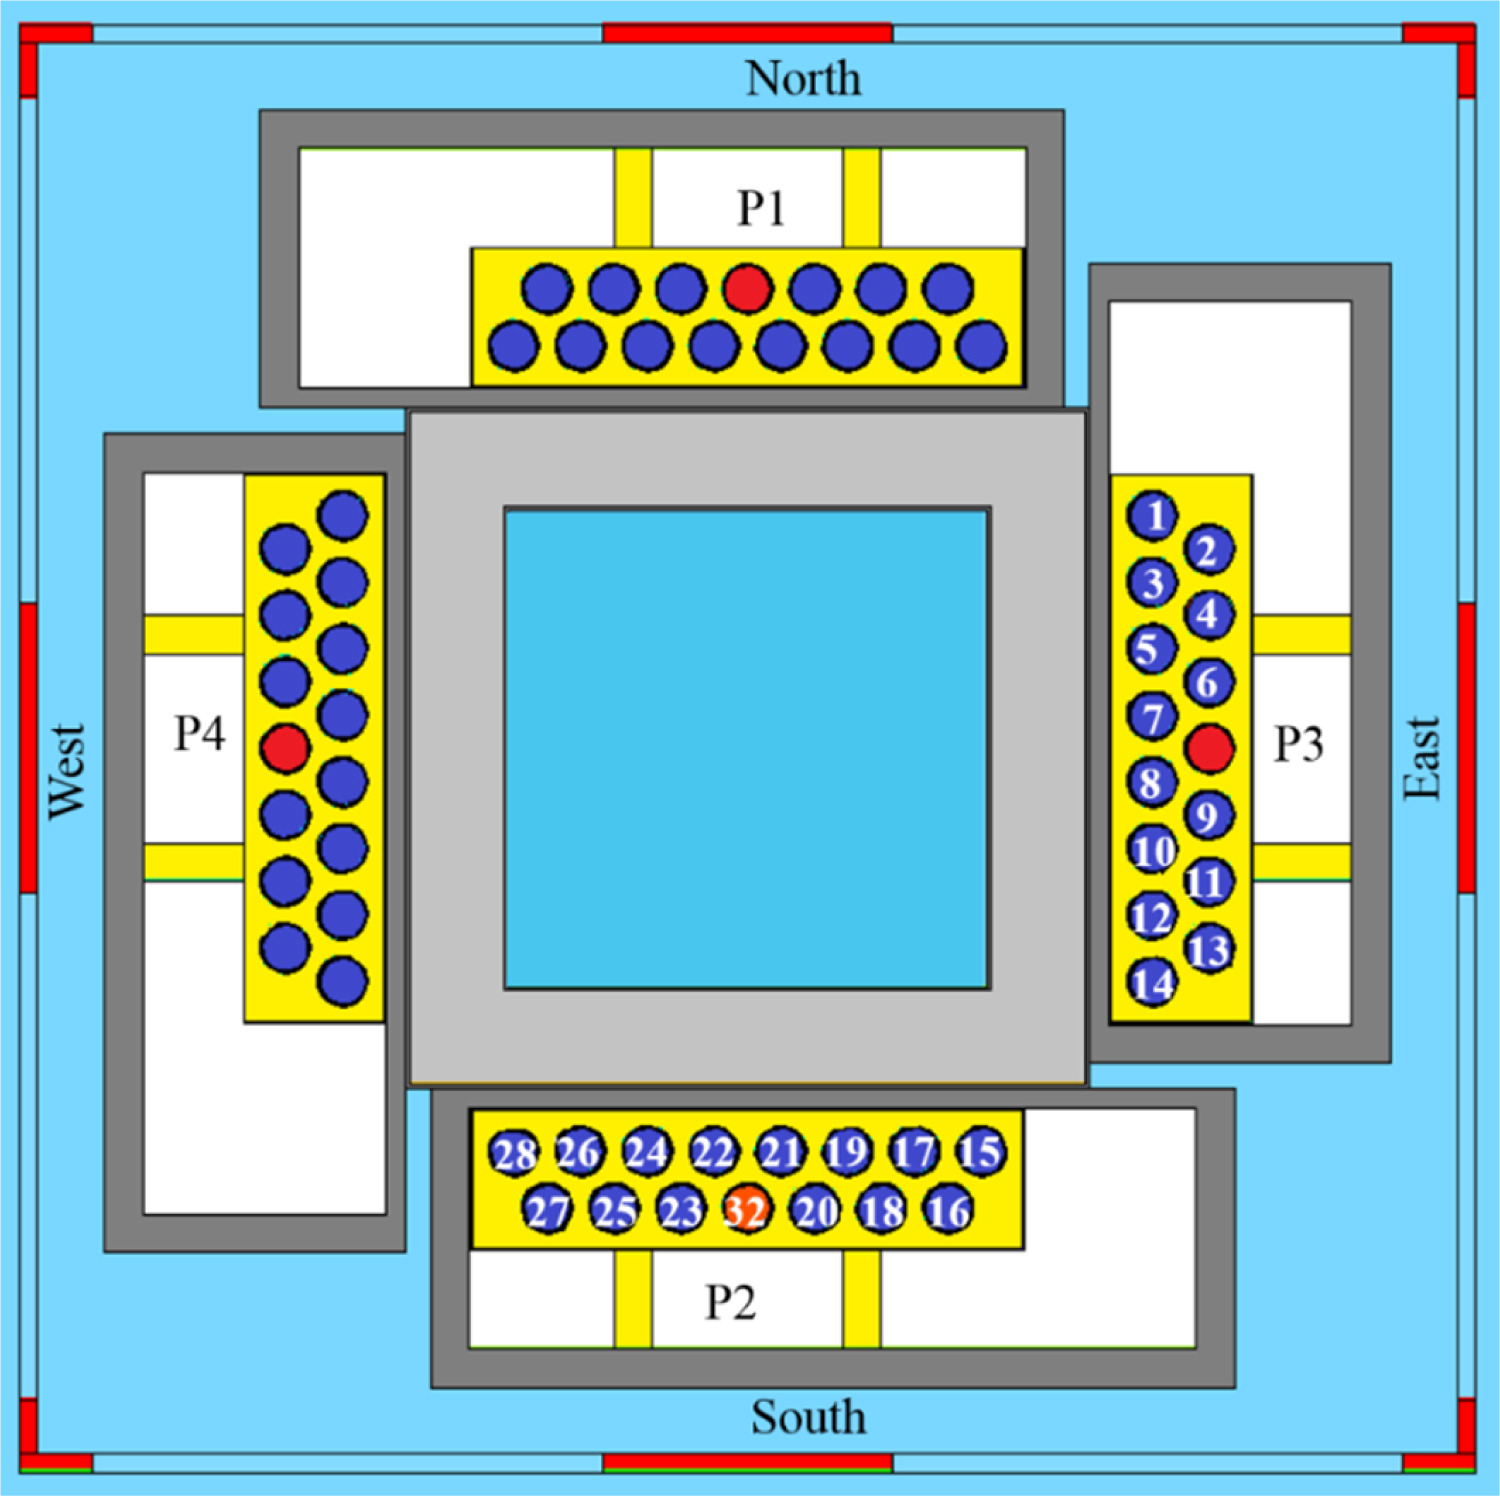 Schematic of the differential die-away self-interrogation (DDSI) instrument showing orientation in the facility and pods used in the field trials (P2 and P3) with output channels labeled.